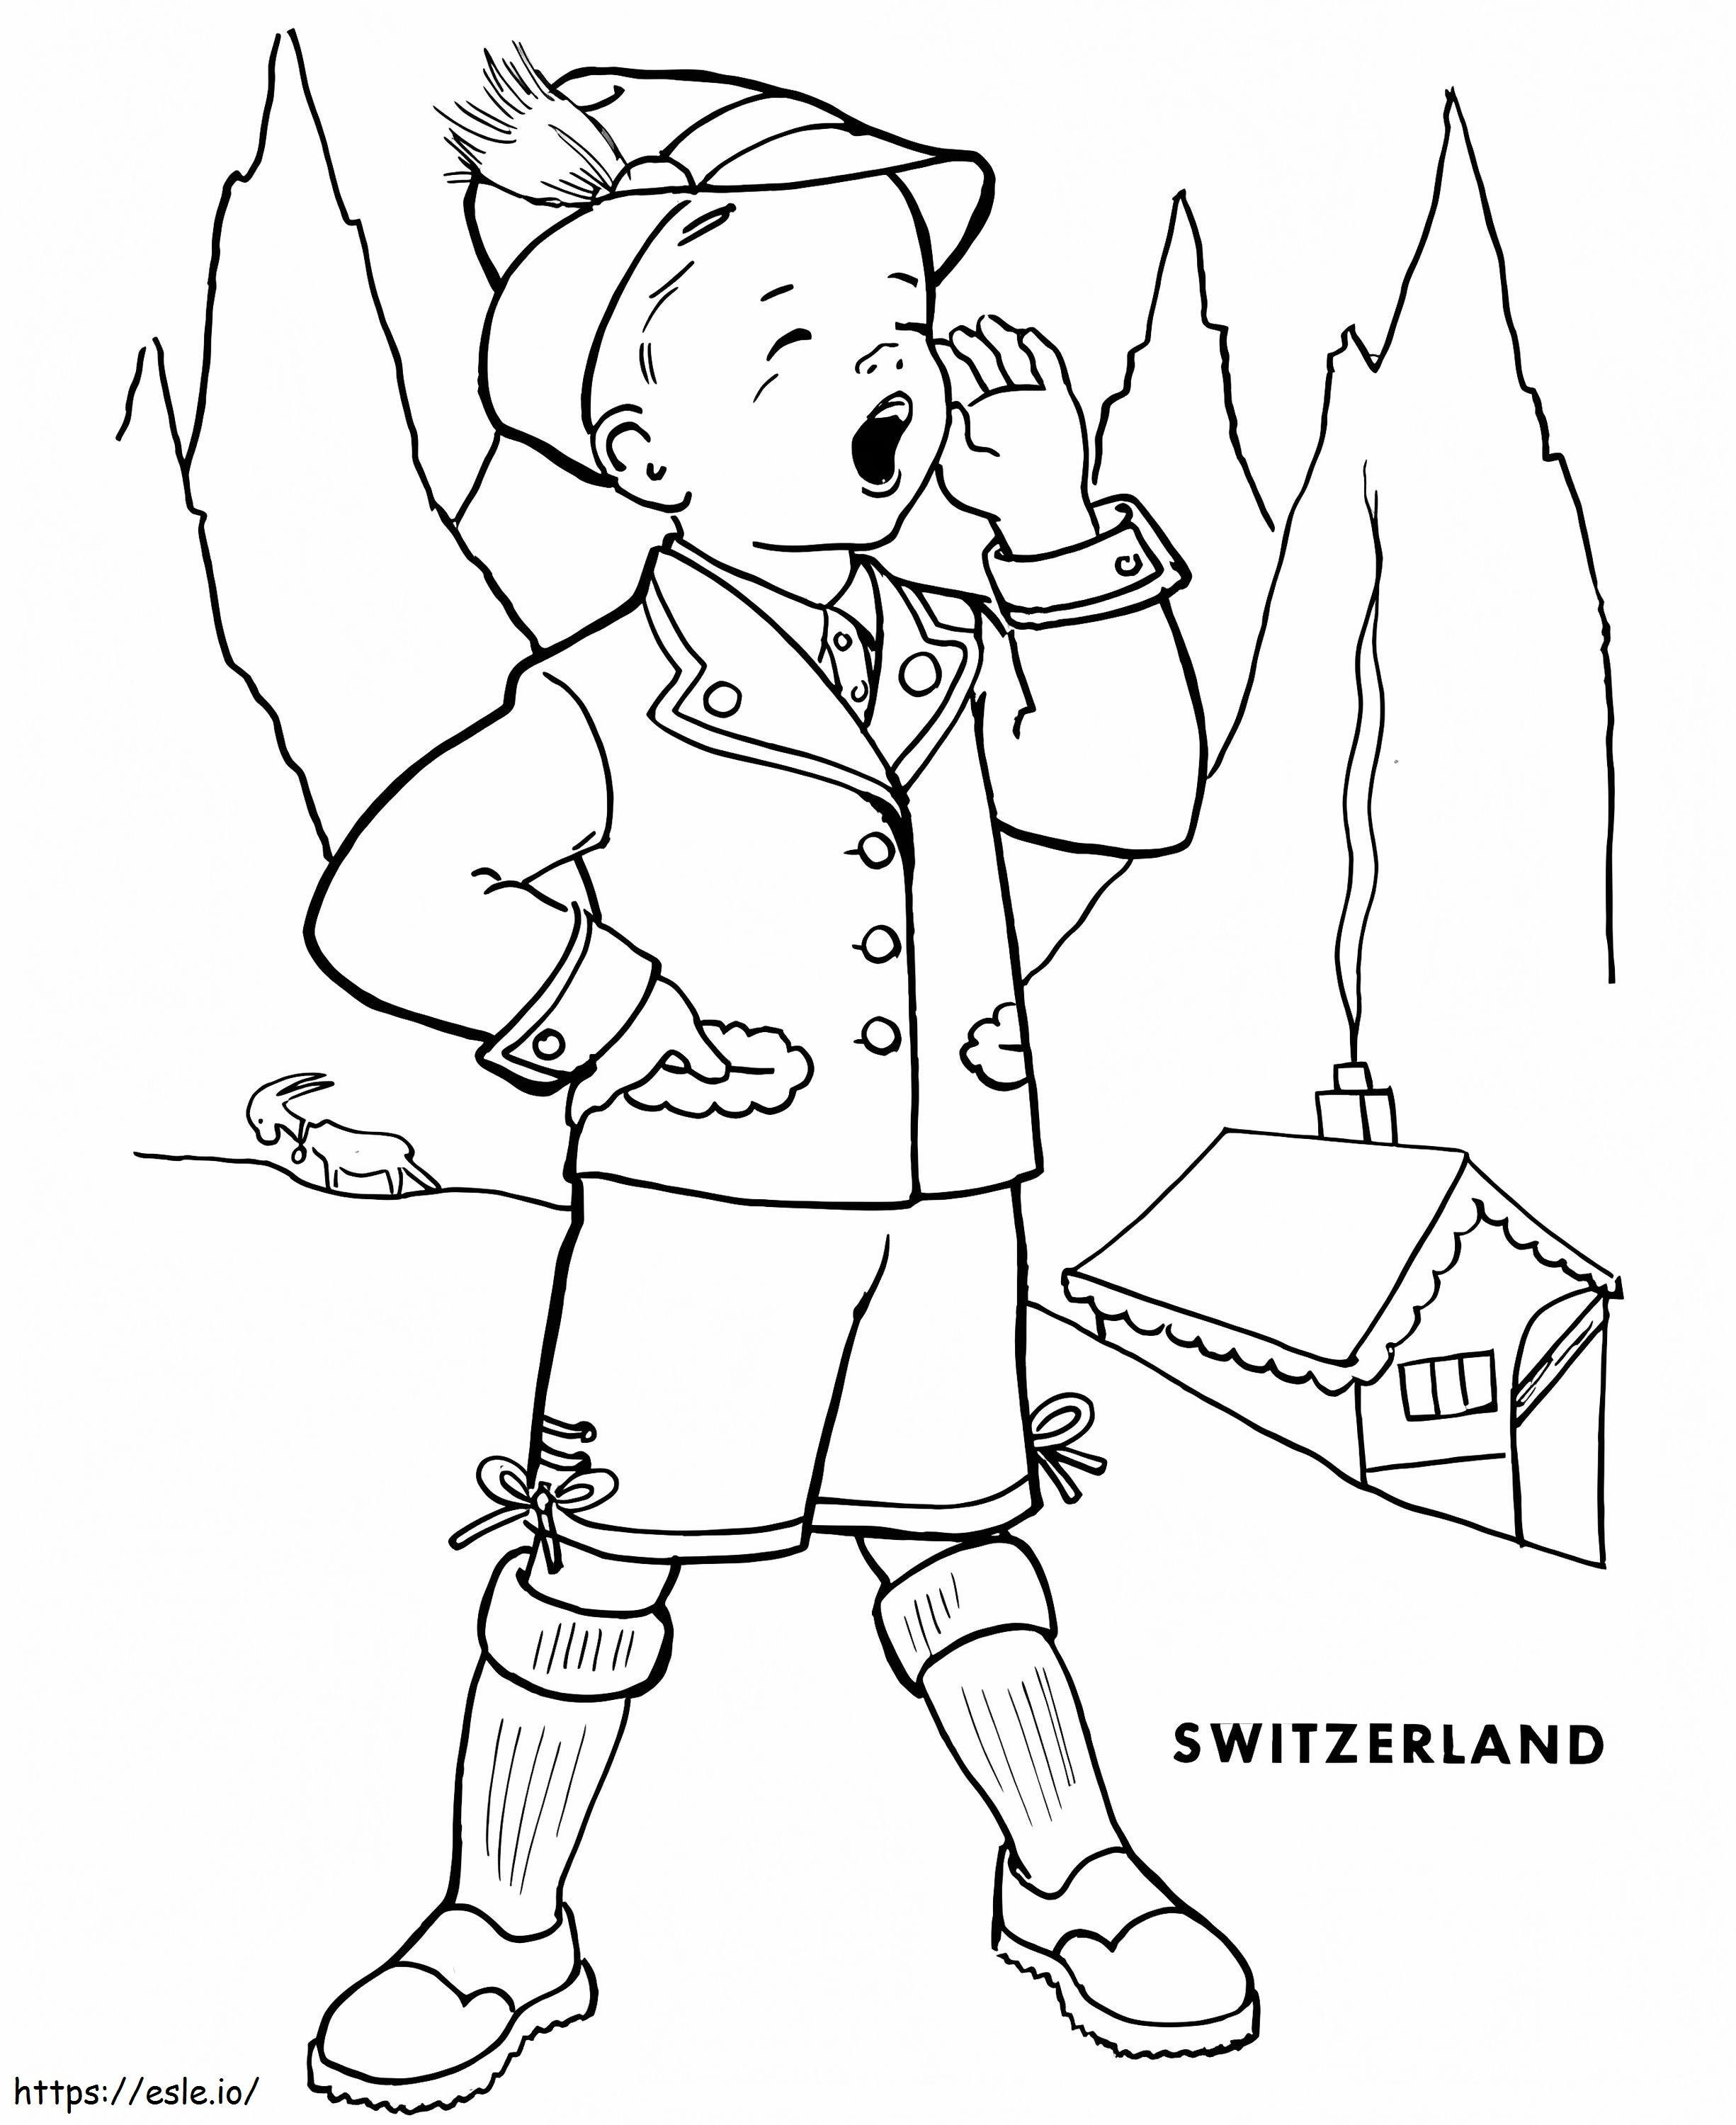 Swiss Boy coloring page